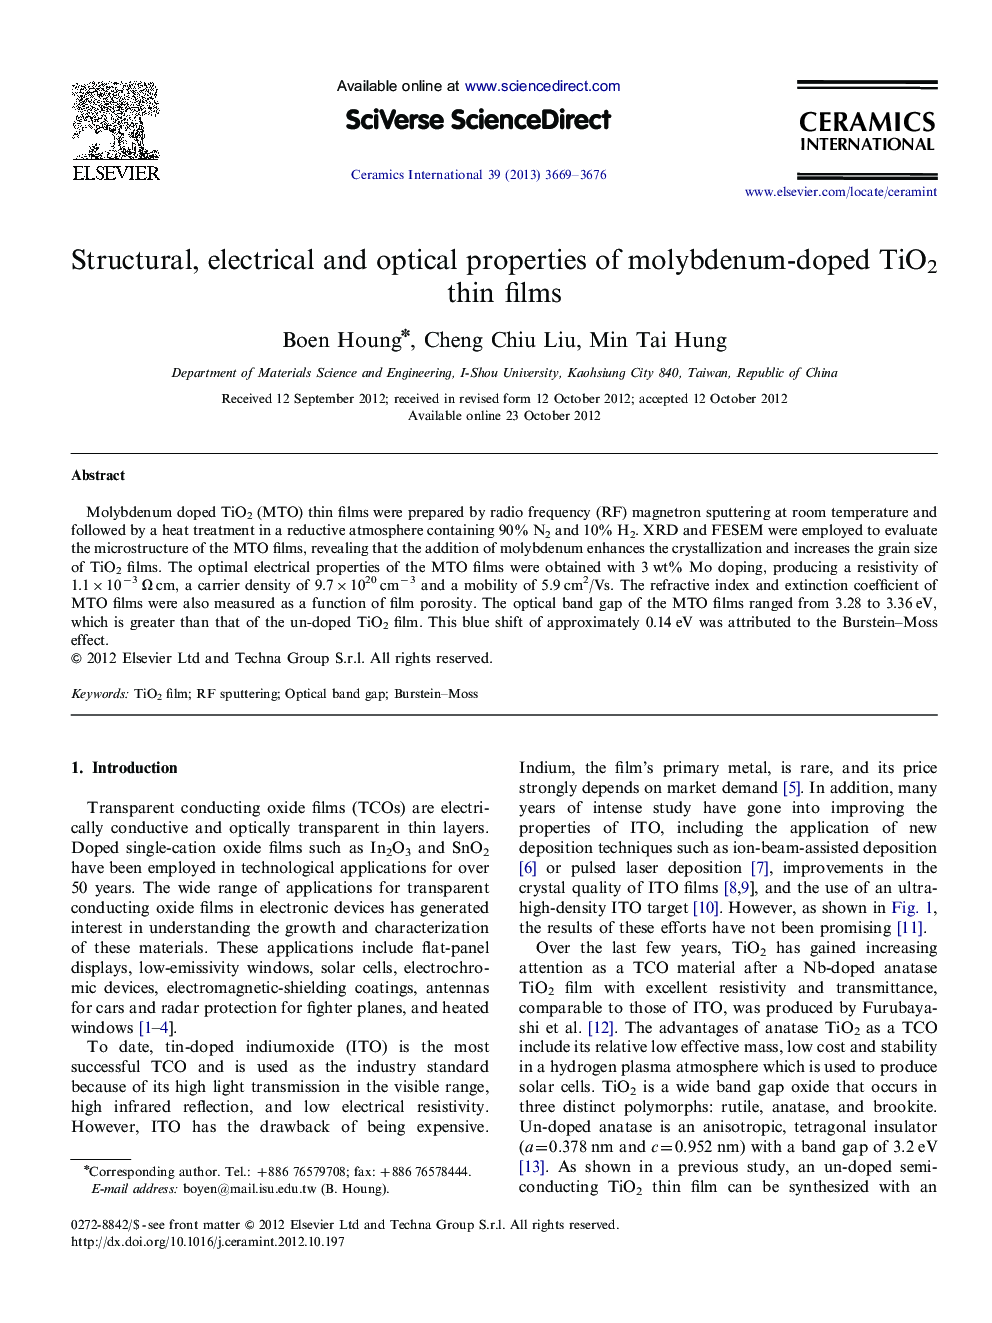 Structural, electrical and optical properties of molybdenum-doped TiO2 thin films